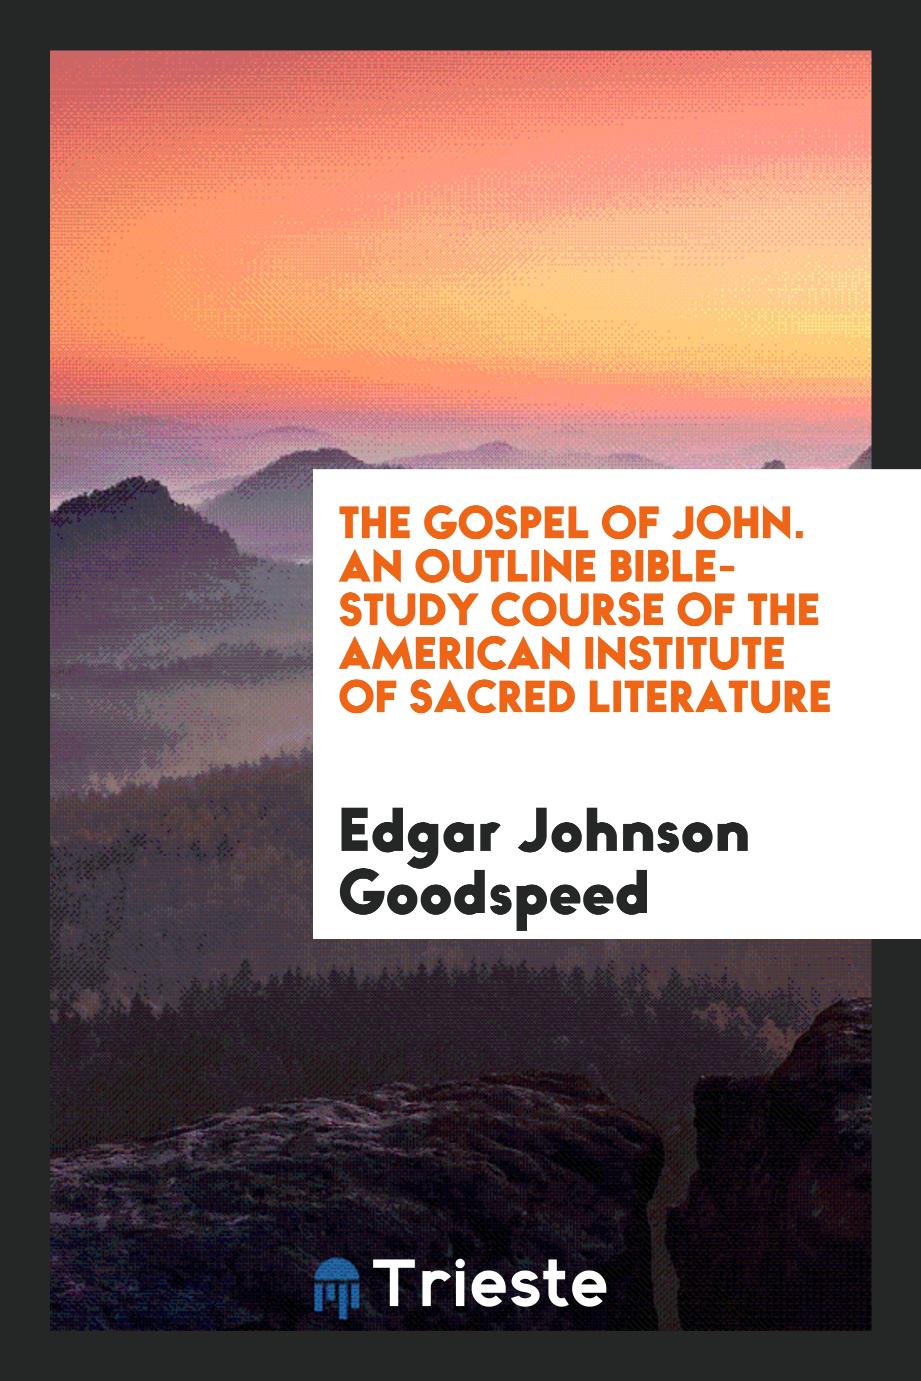 The Gospel of John. An outline bible-study course of the American institute of sacred literature